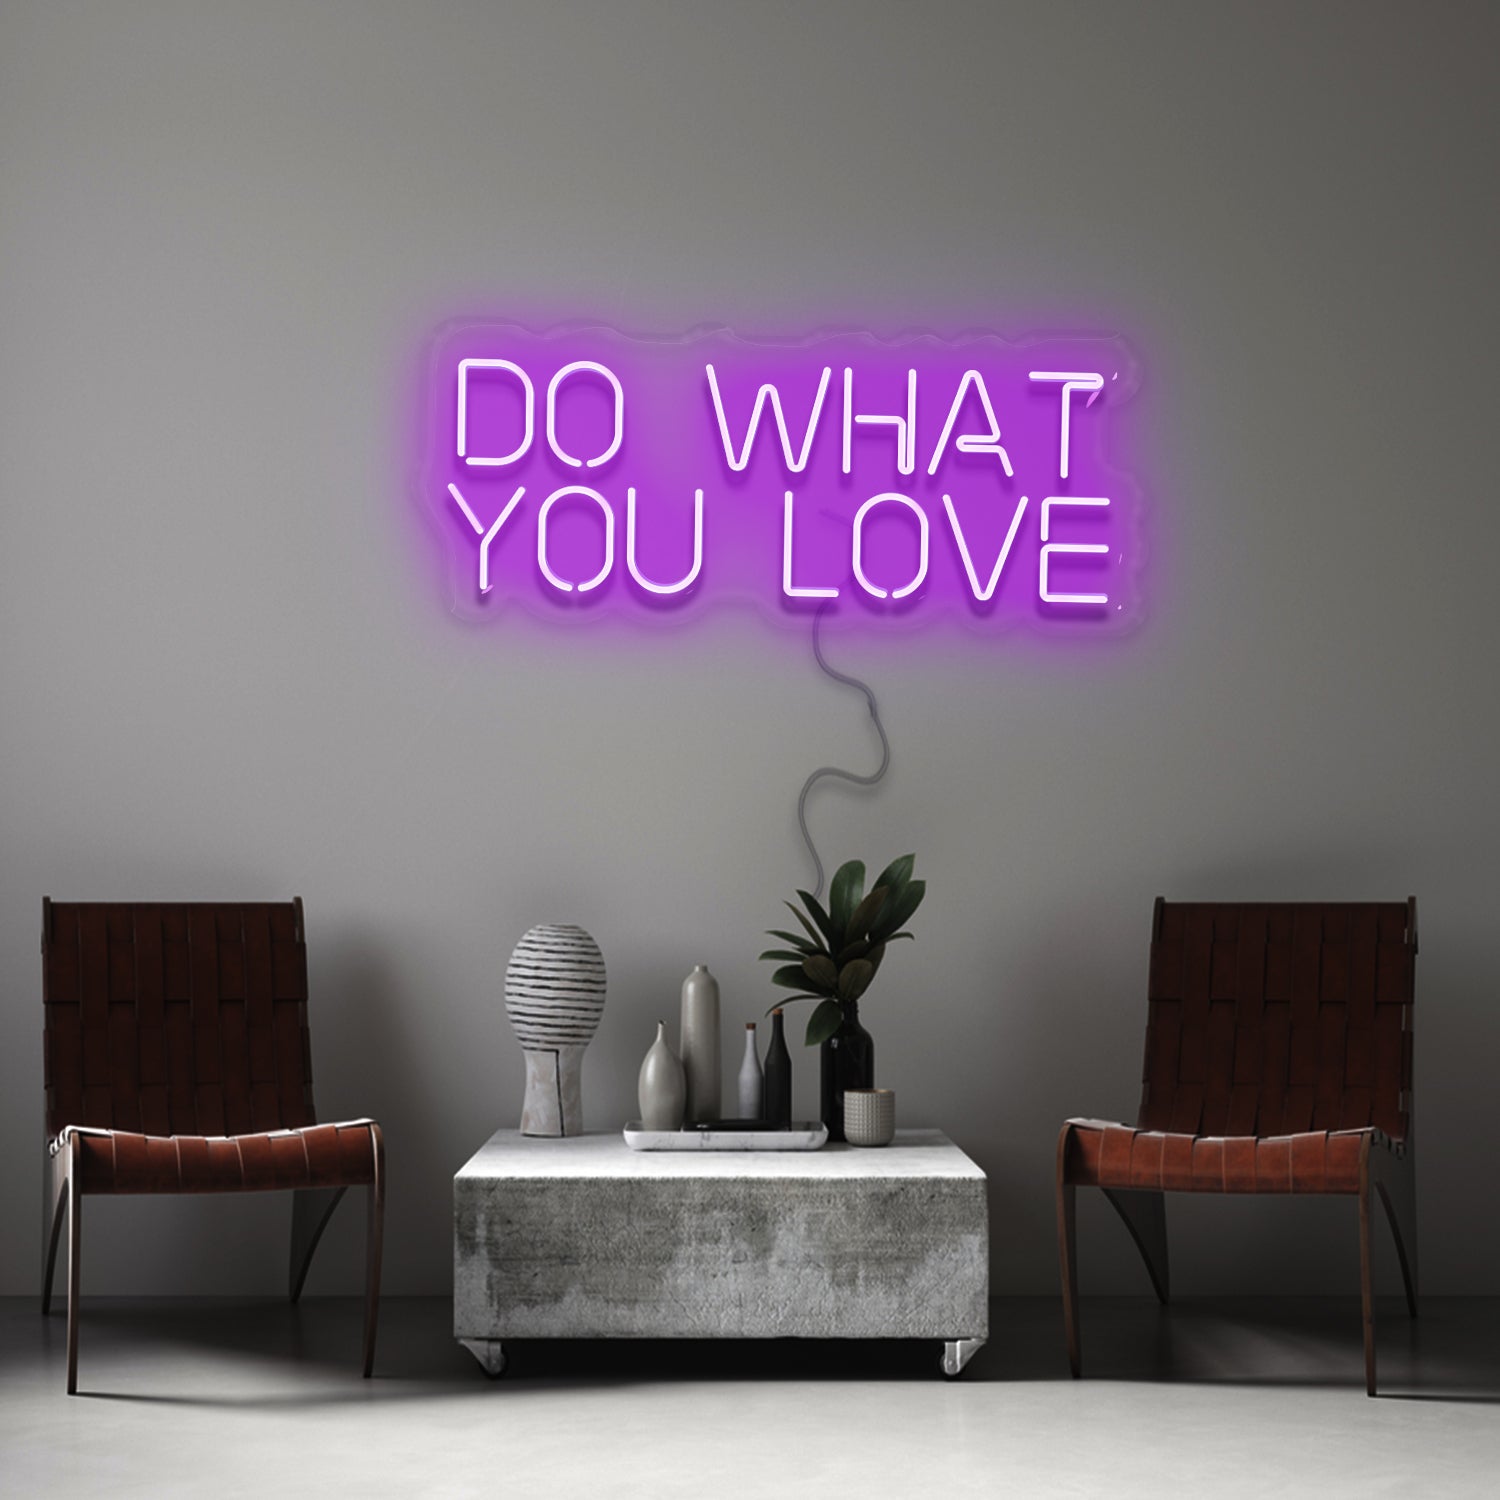 Do more of what you love